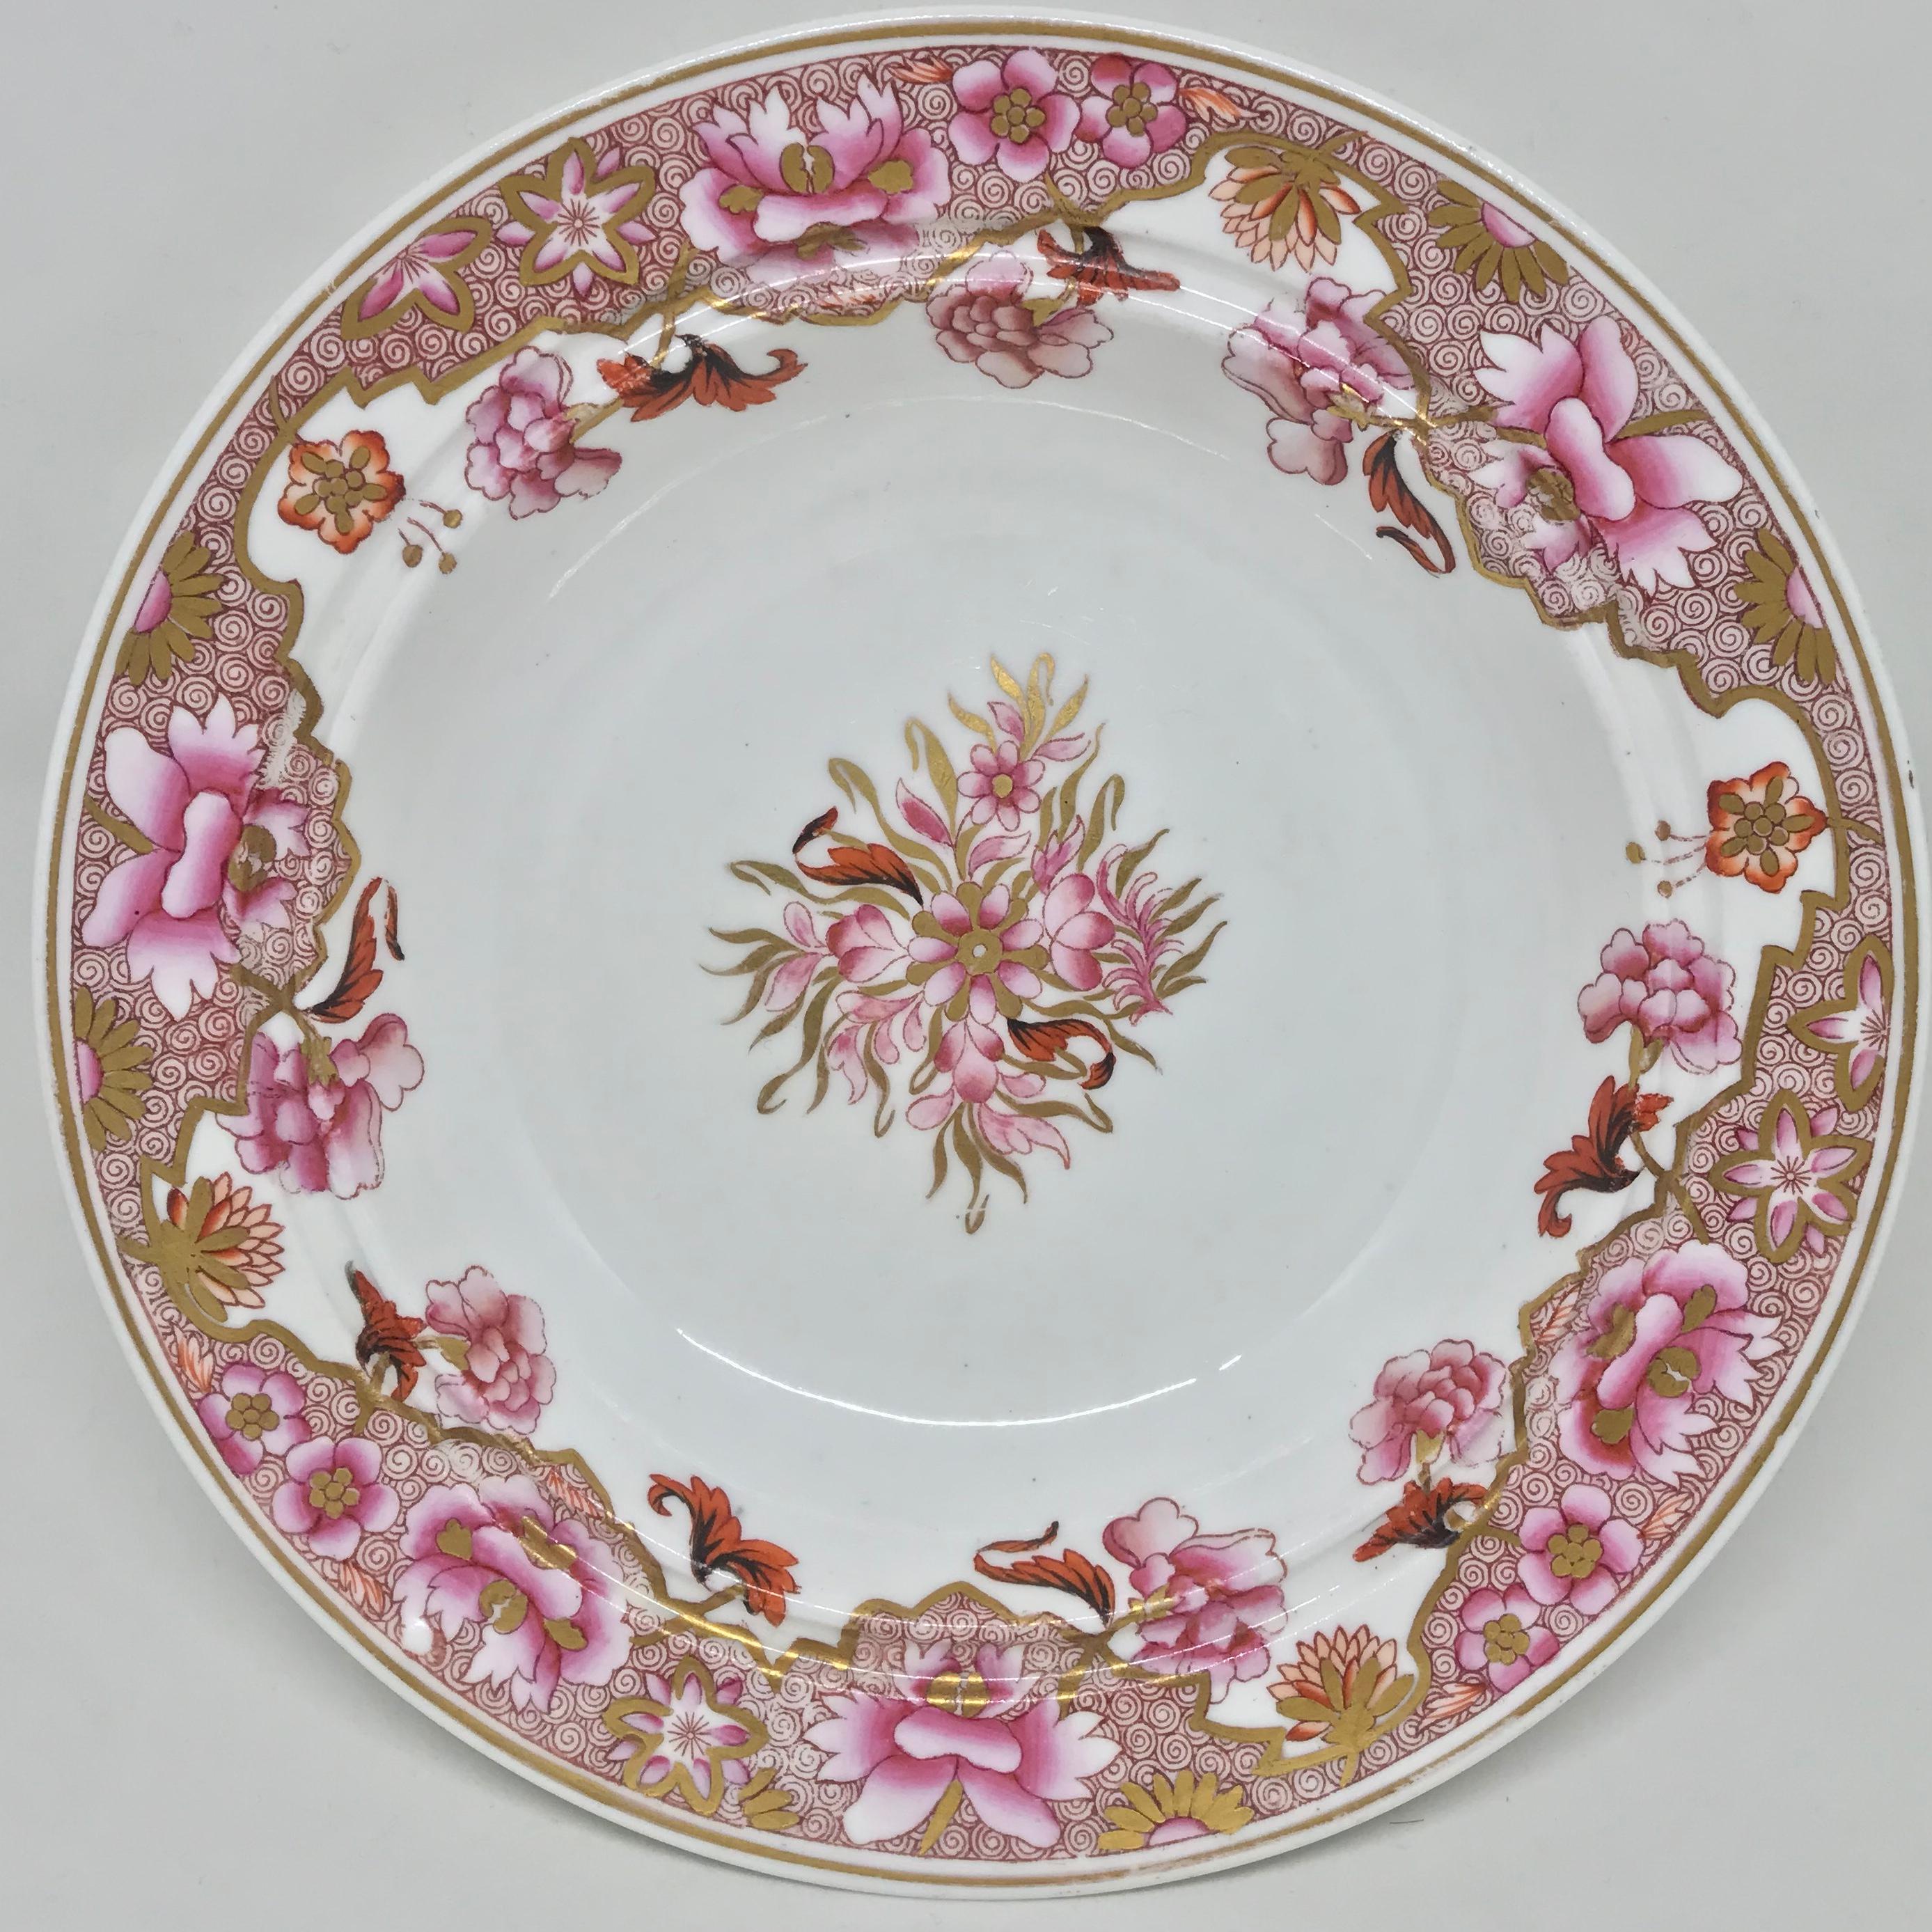 Spode pink and gilt plate. Early Spode porcelain plate with floral border in pinks reds and gold on white ground surrounding central floral spray. Under glaze marking for Spode, England, early 19th century.
Dimensions: 8